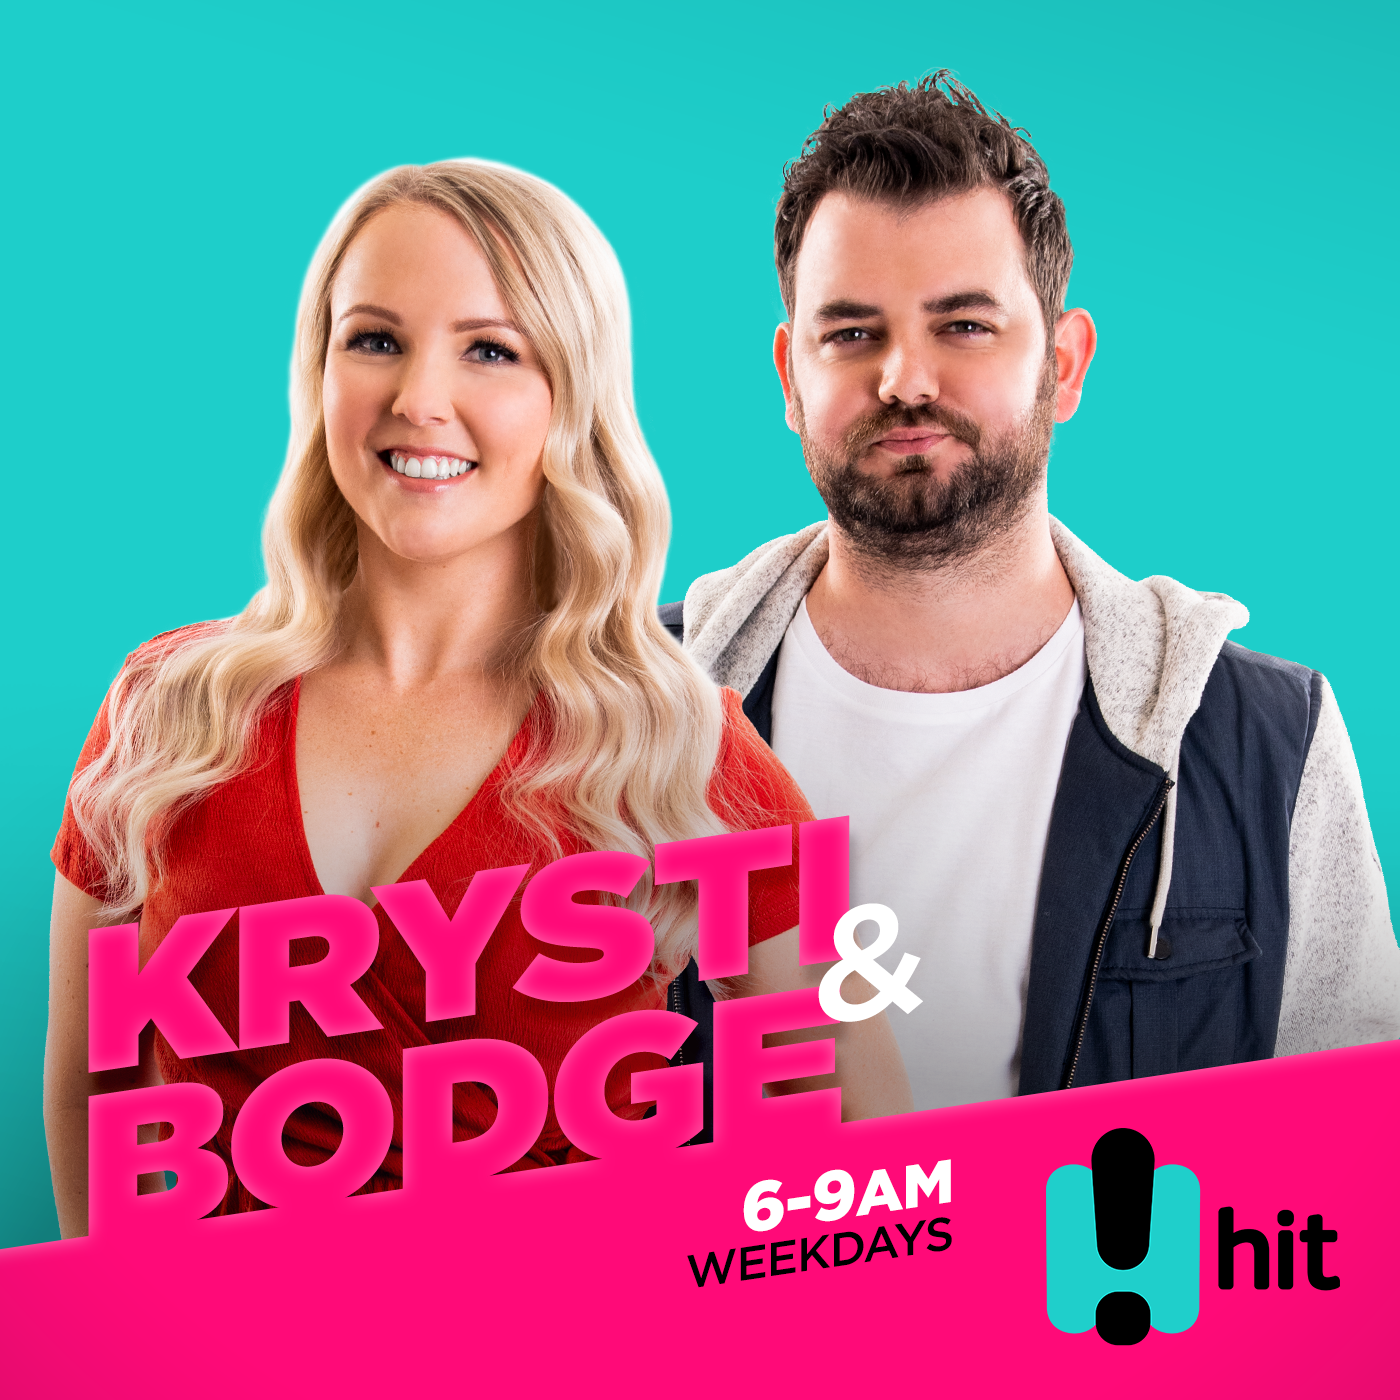 Krysti & Bodge - Educating Bodge On Sanitary Items, Is Bodge Leaving? Fake News With Leigh Giollo